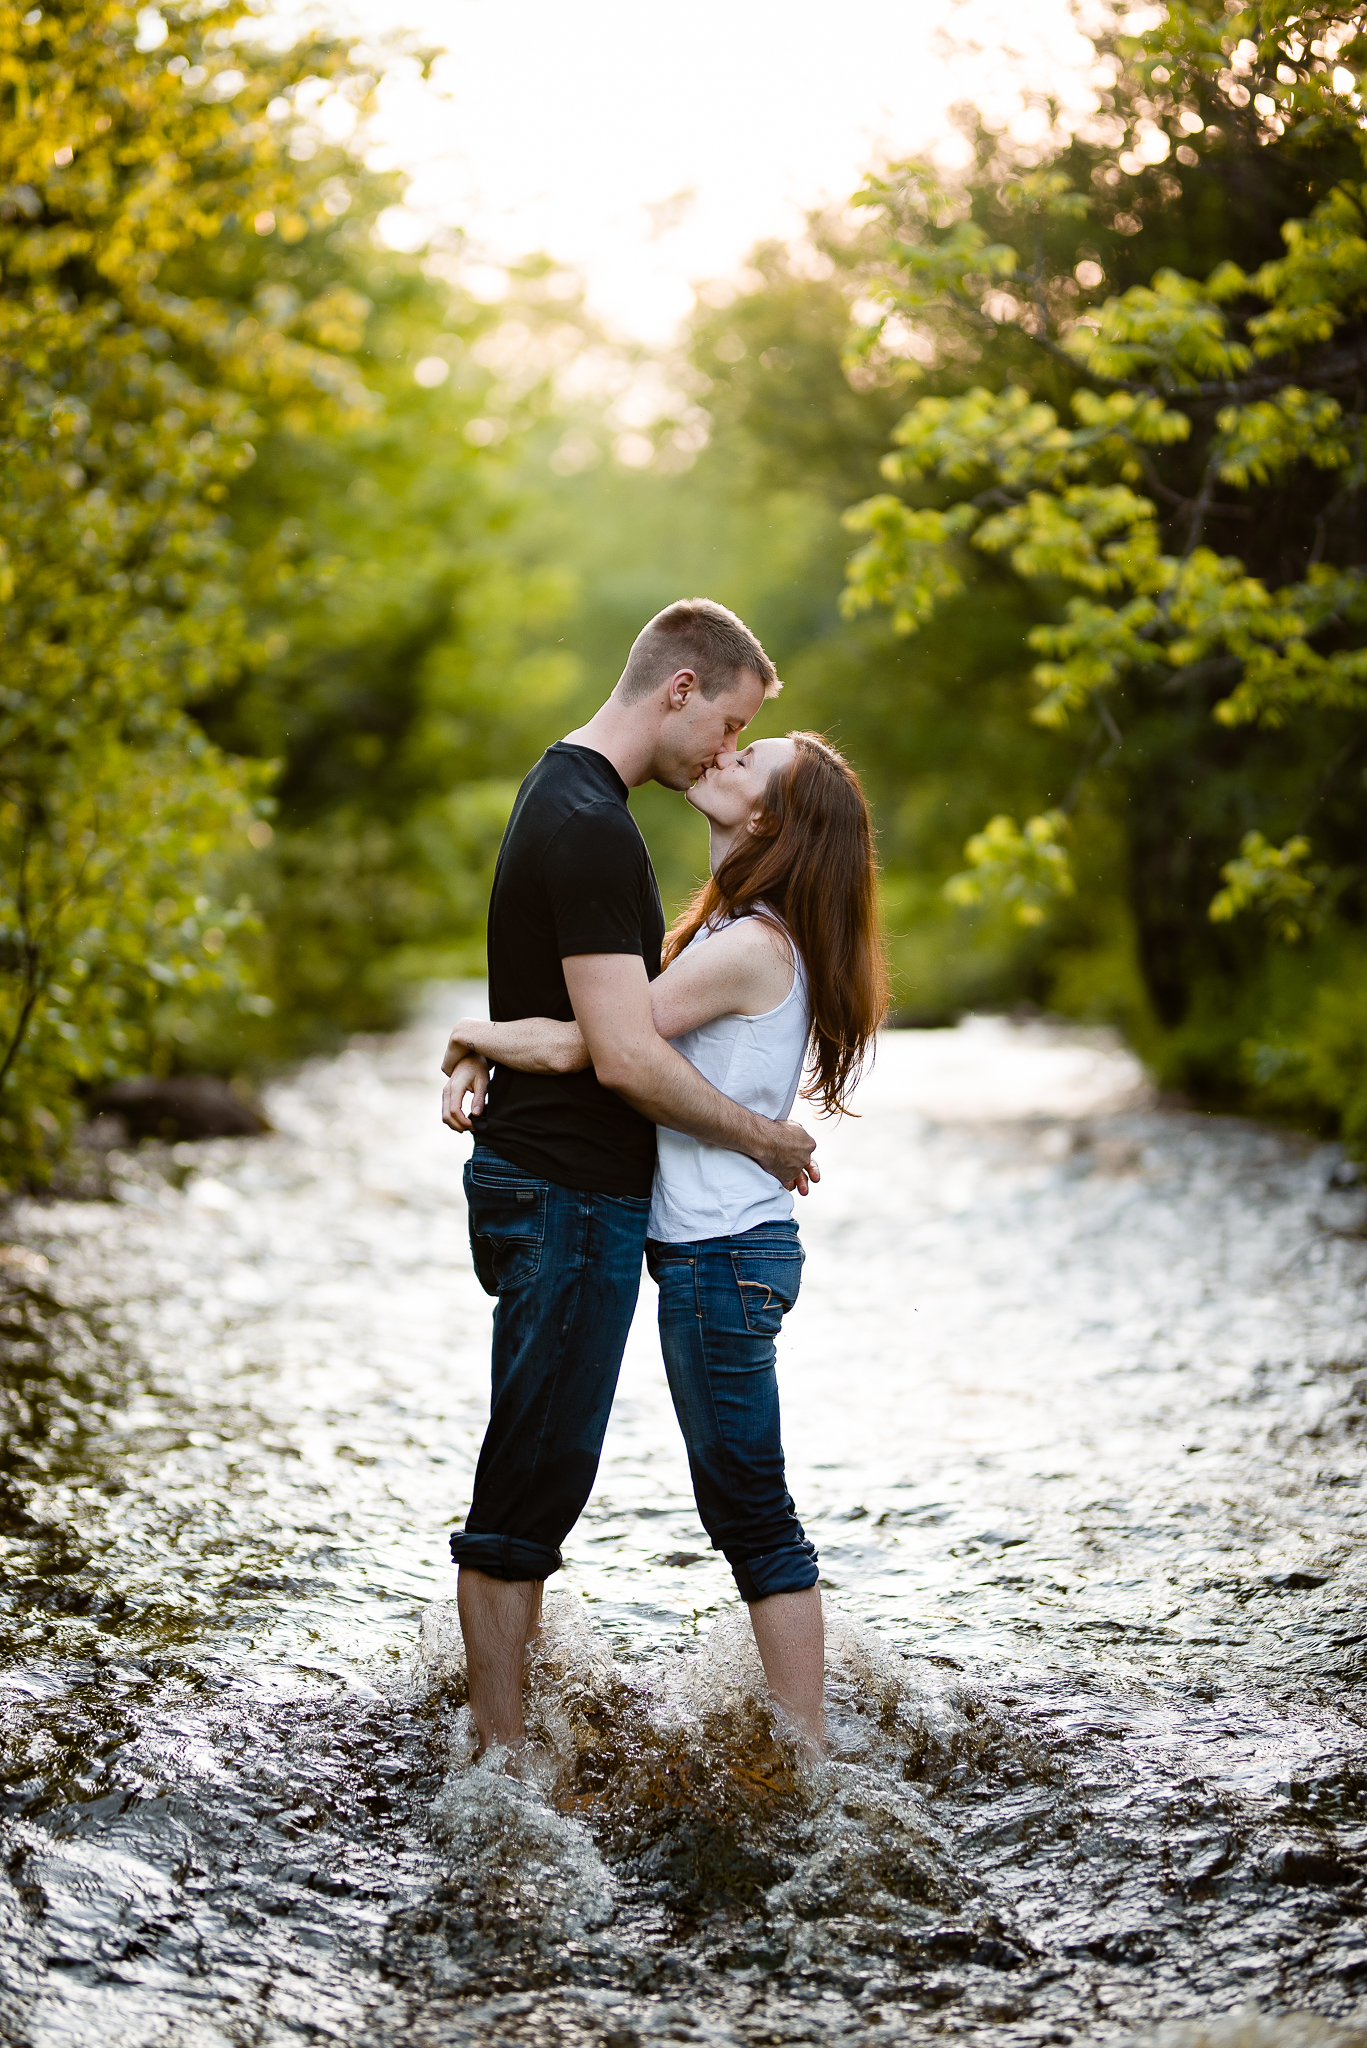 Couples511NaomiLuciennePhotography062019-Edit.jpg